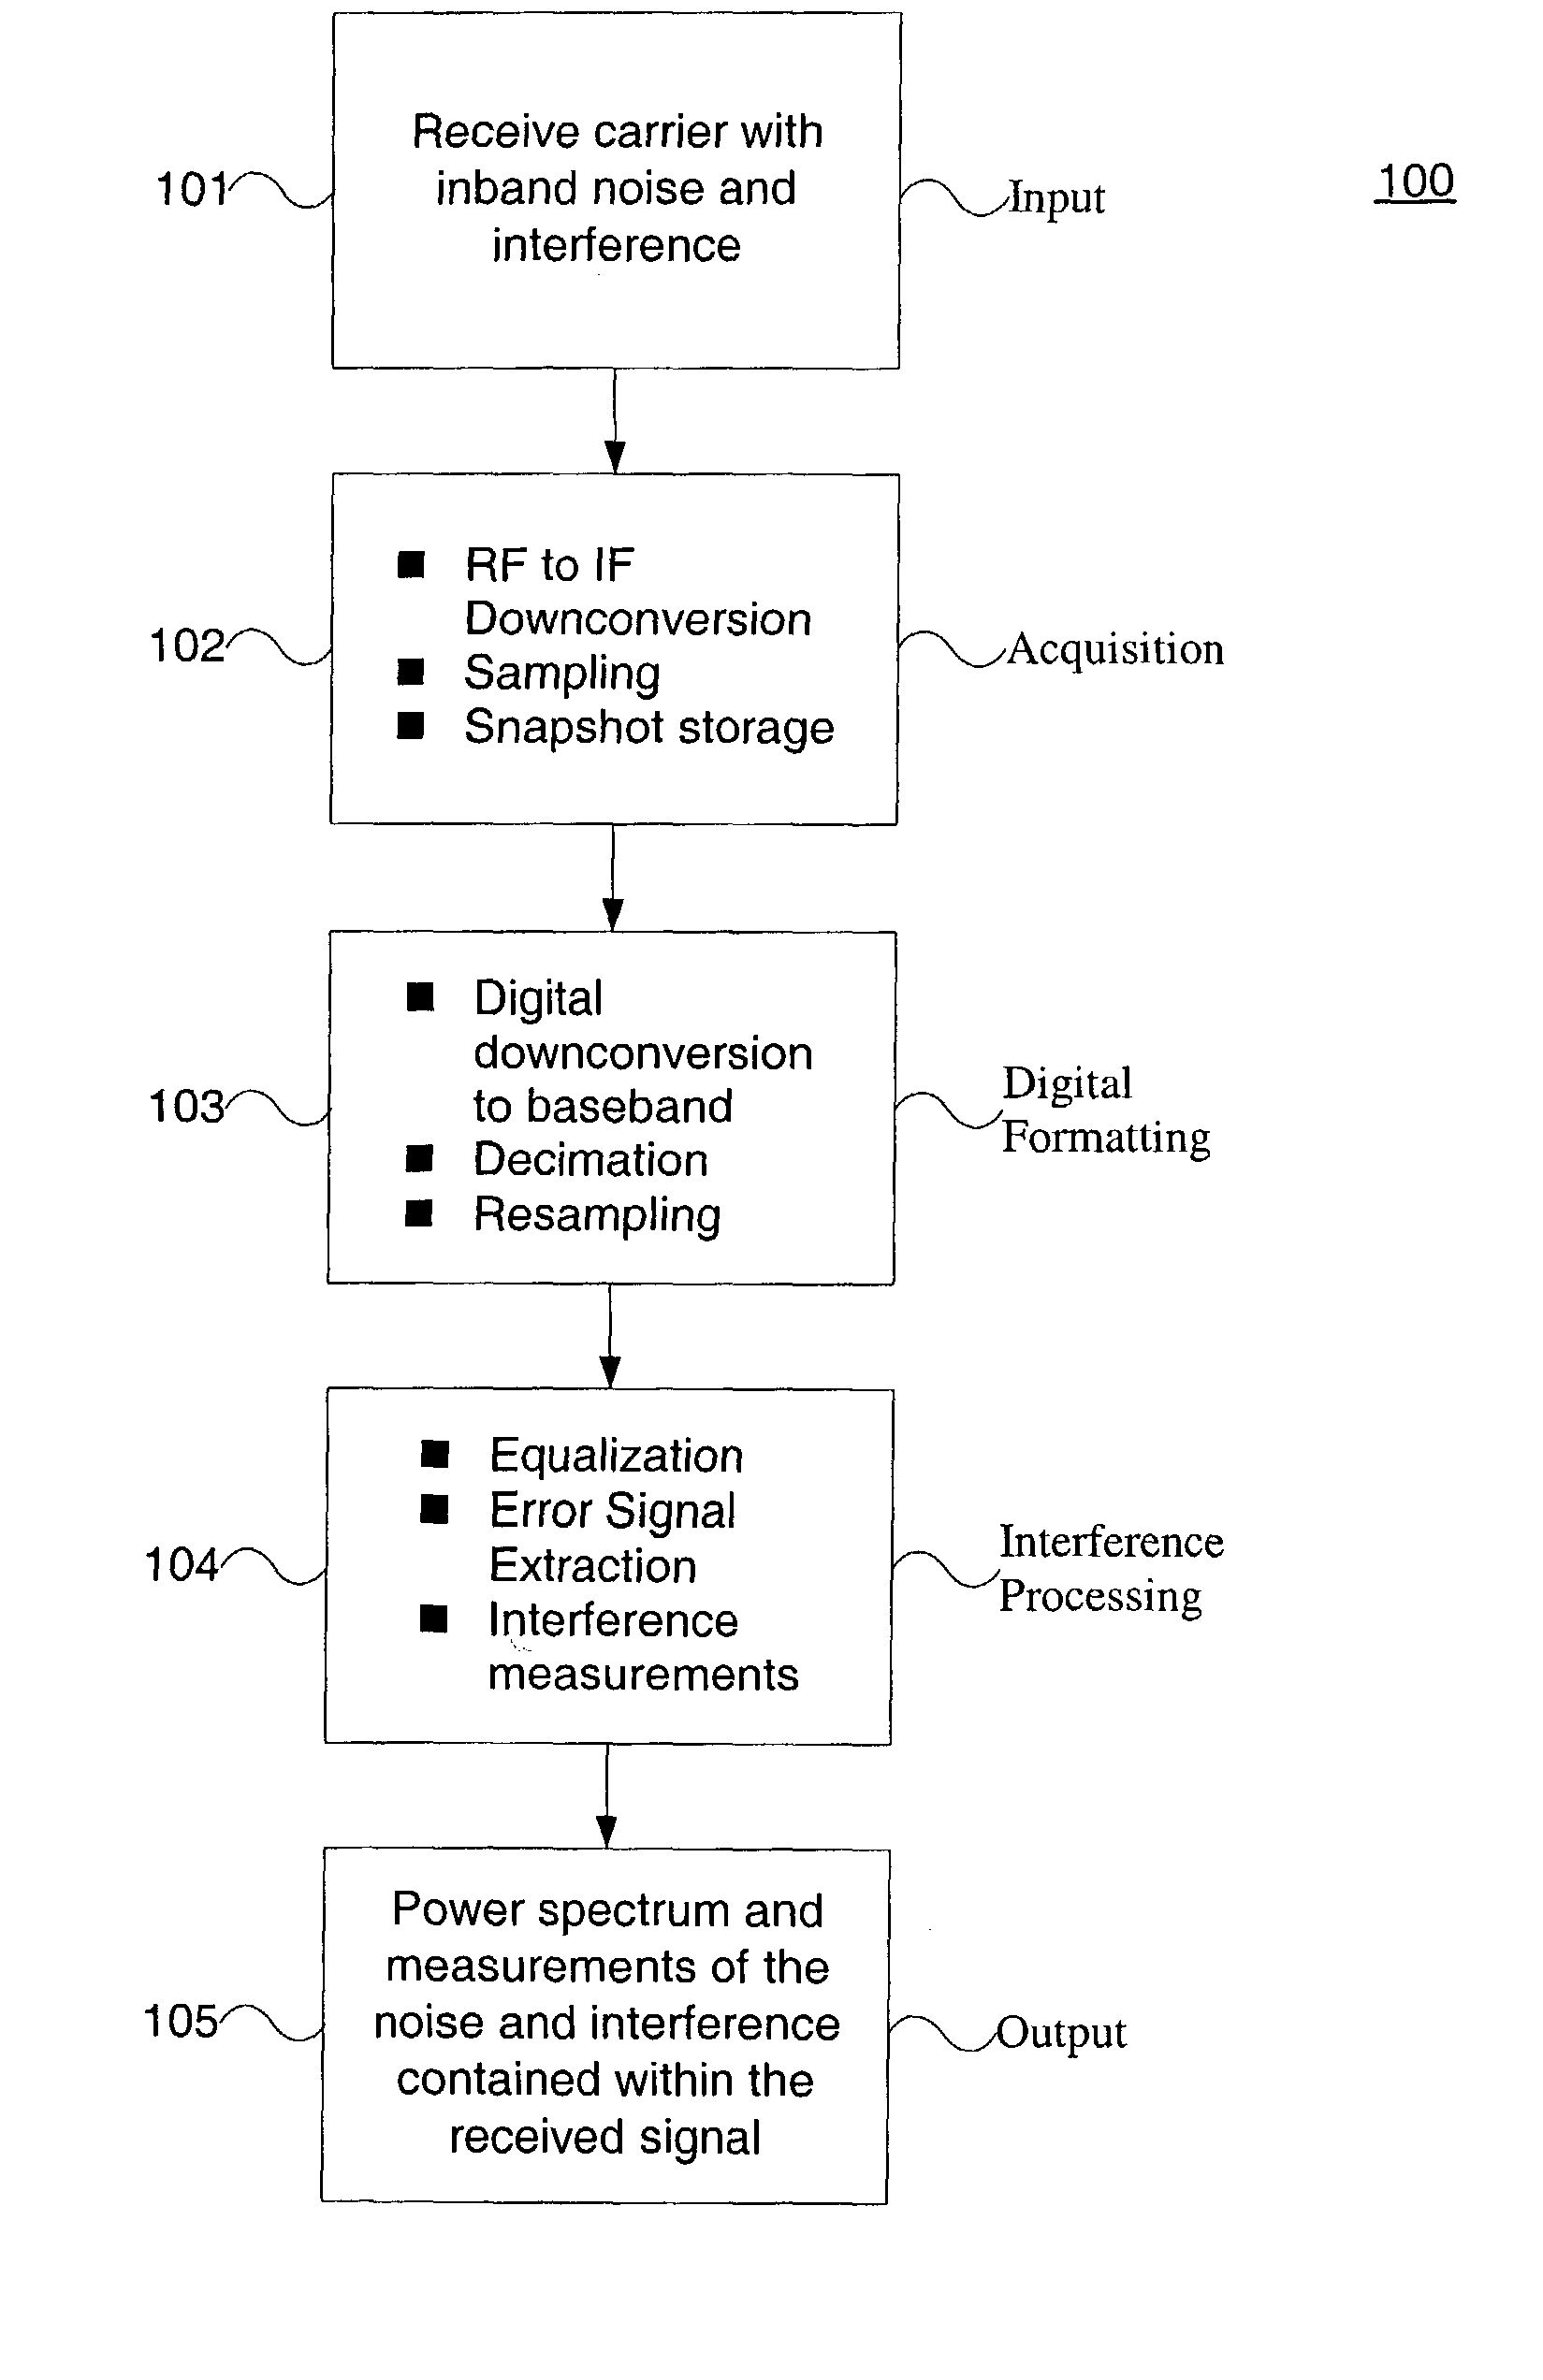 Detecting and measuring interference contained within a digital carrier